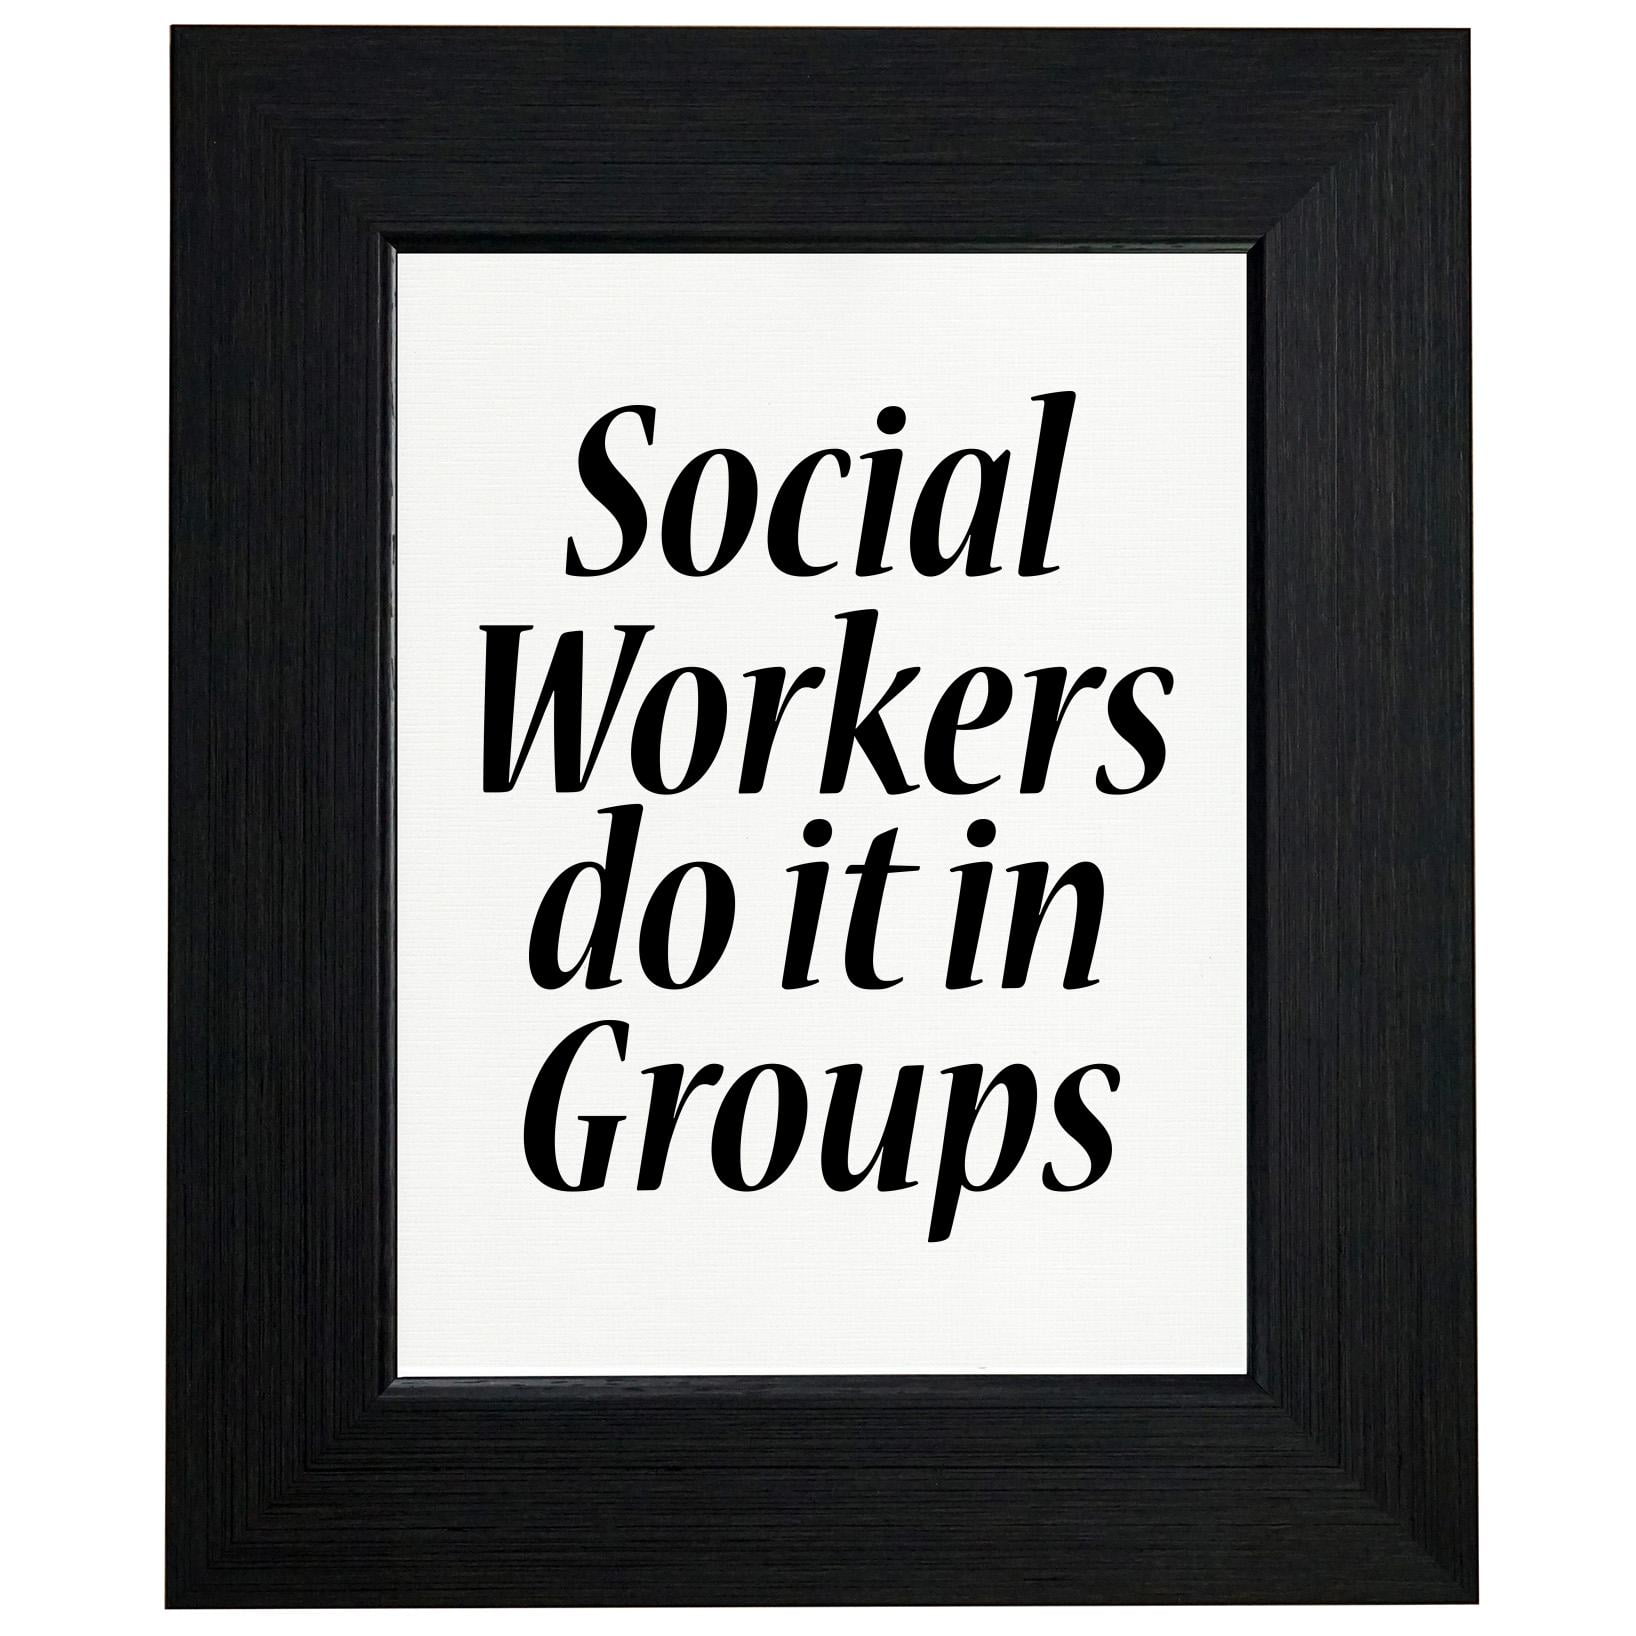 Social Workers Do It In Groups - Funny Social Work Framed Print Poster Wall  or Desk Mount Options 